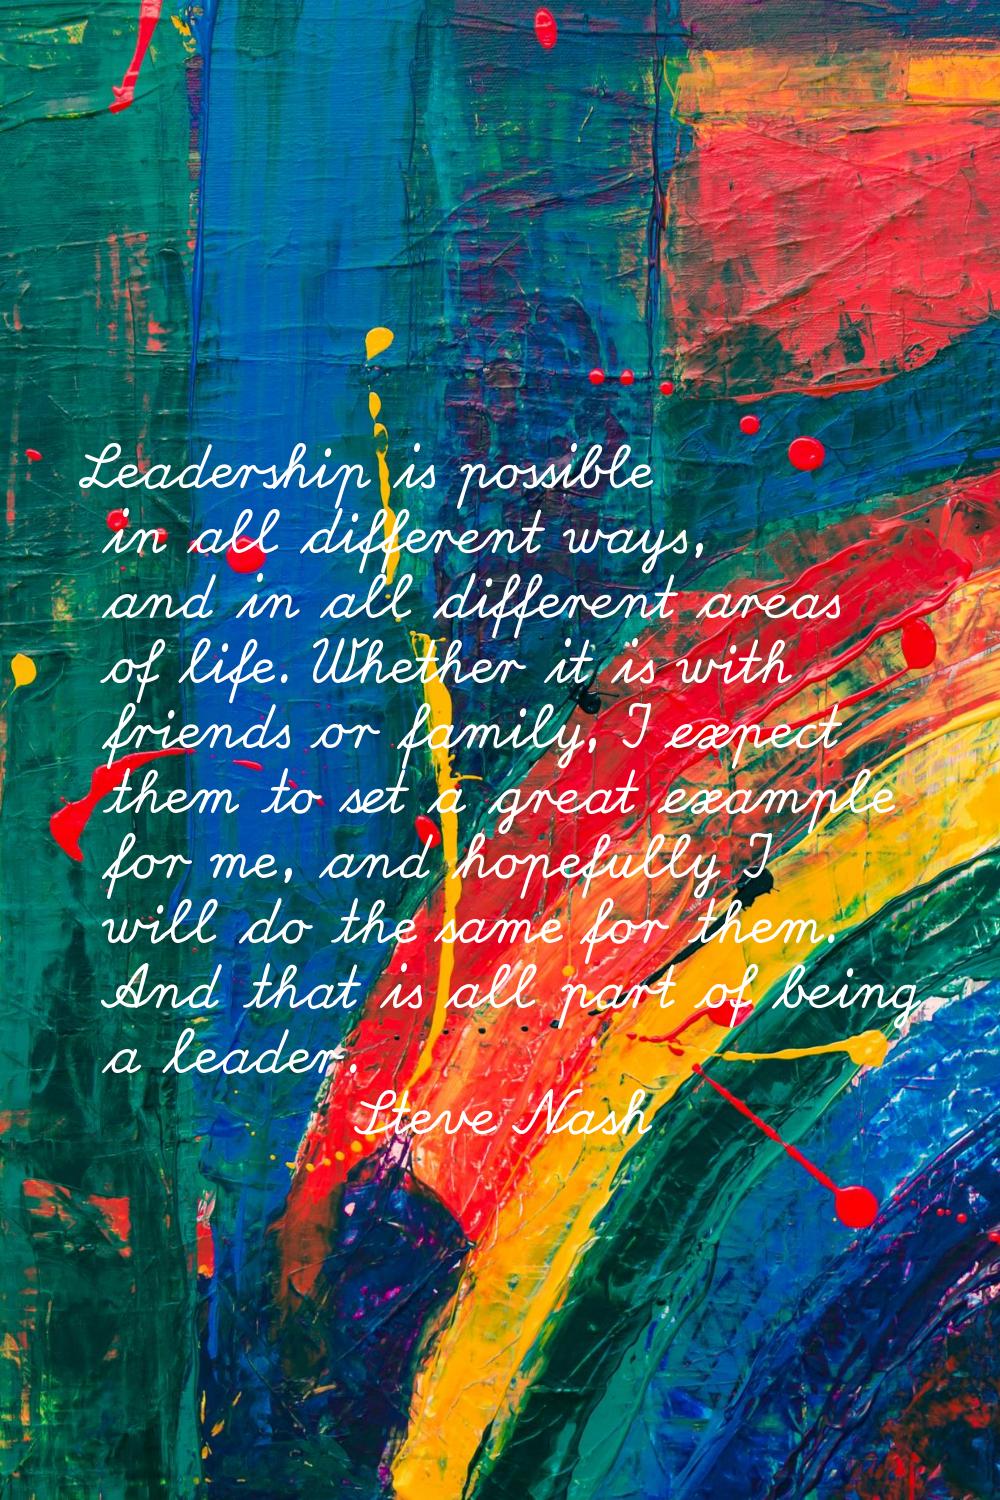 Leadership is possible in all different ways, and in all different areas of life. Whether it is wit